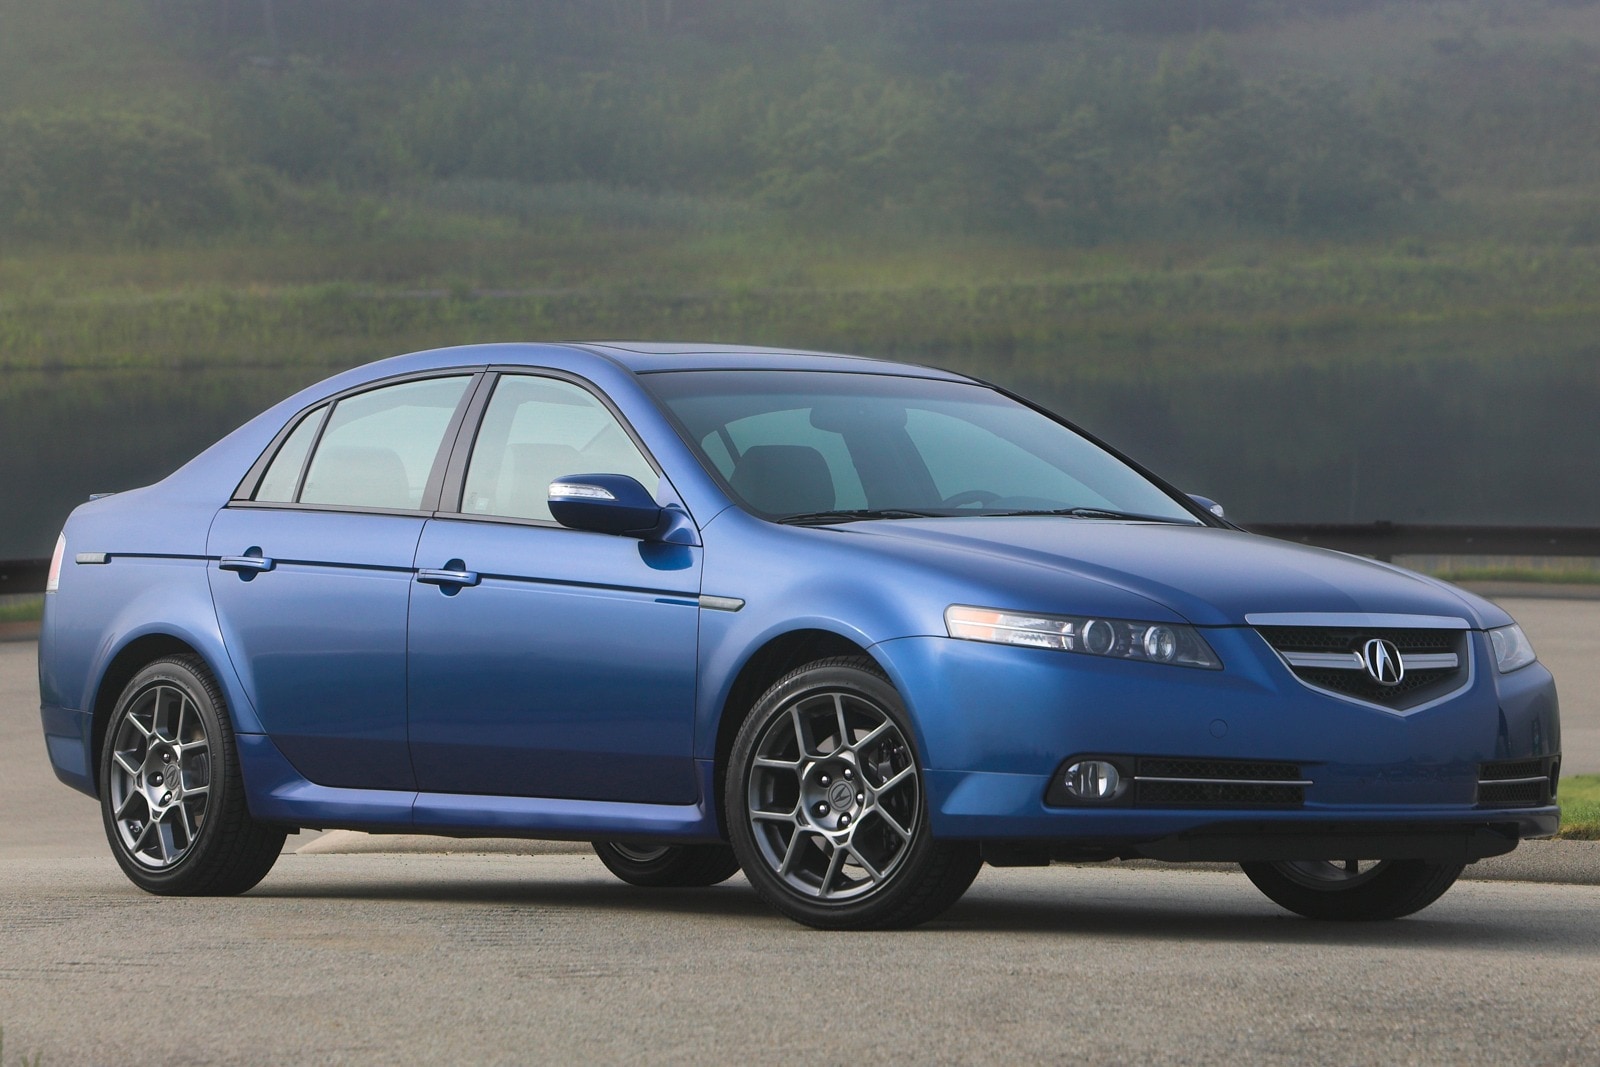 Used 2008 Acura TL Type-S Review | Edmunds